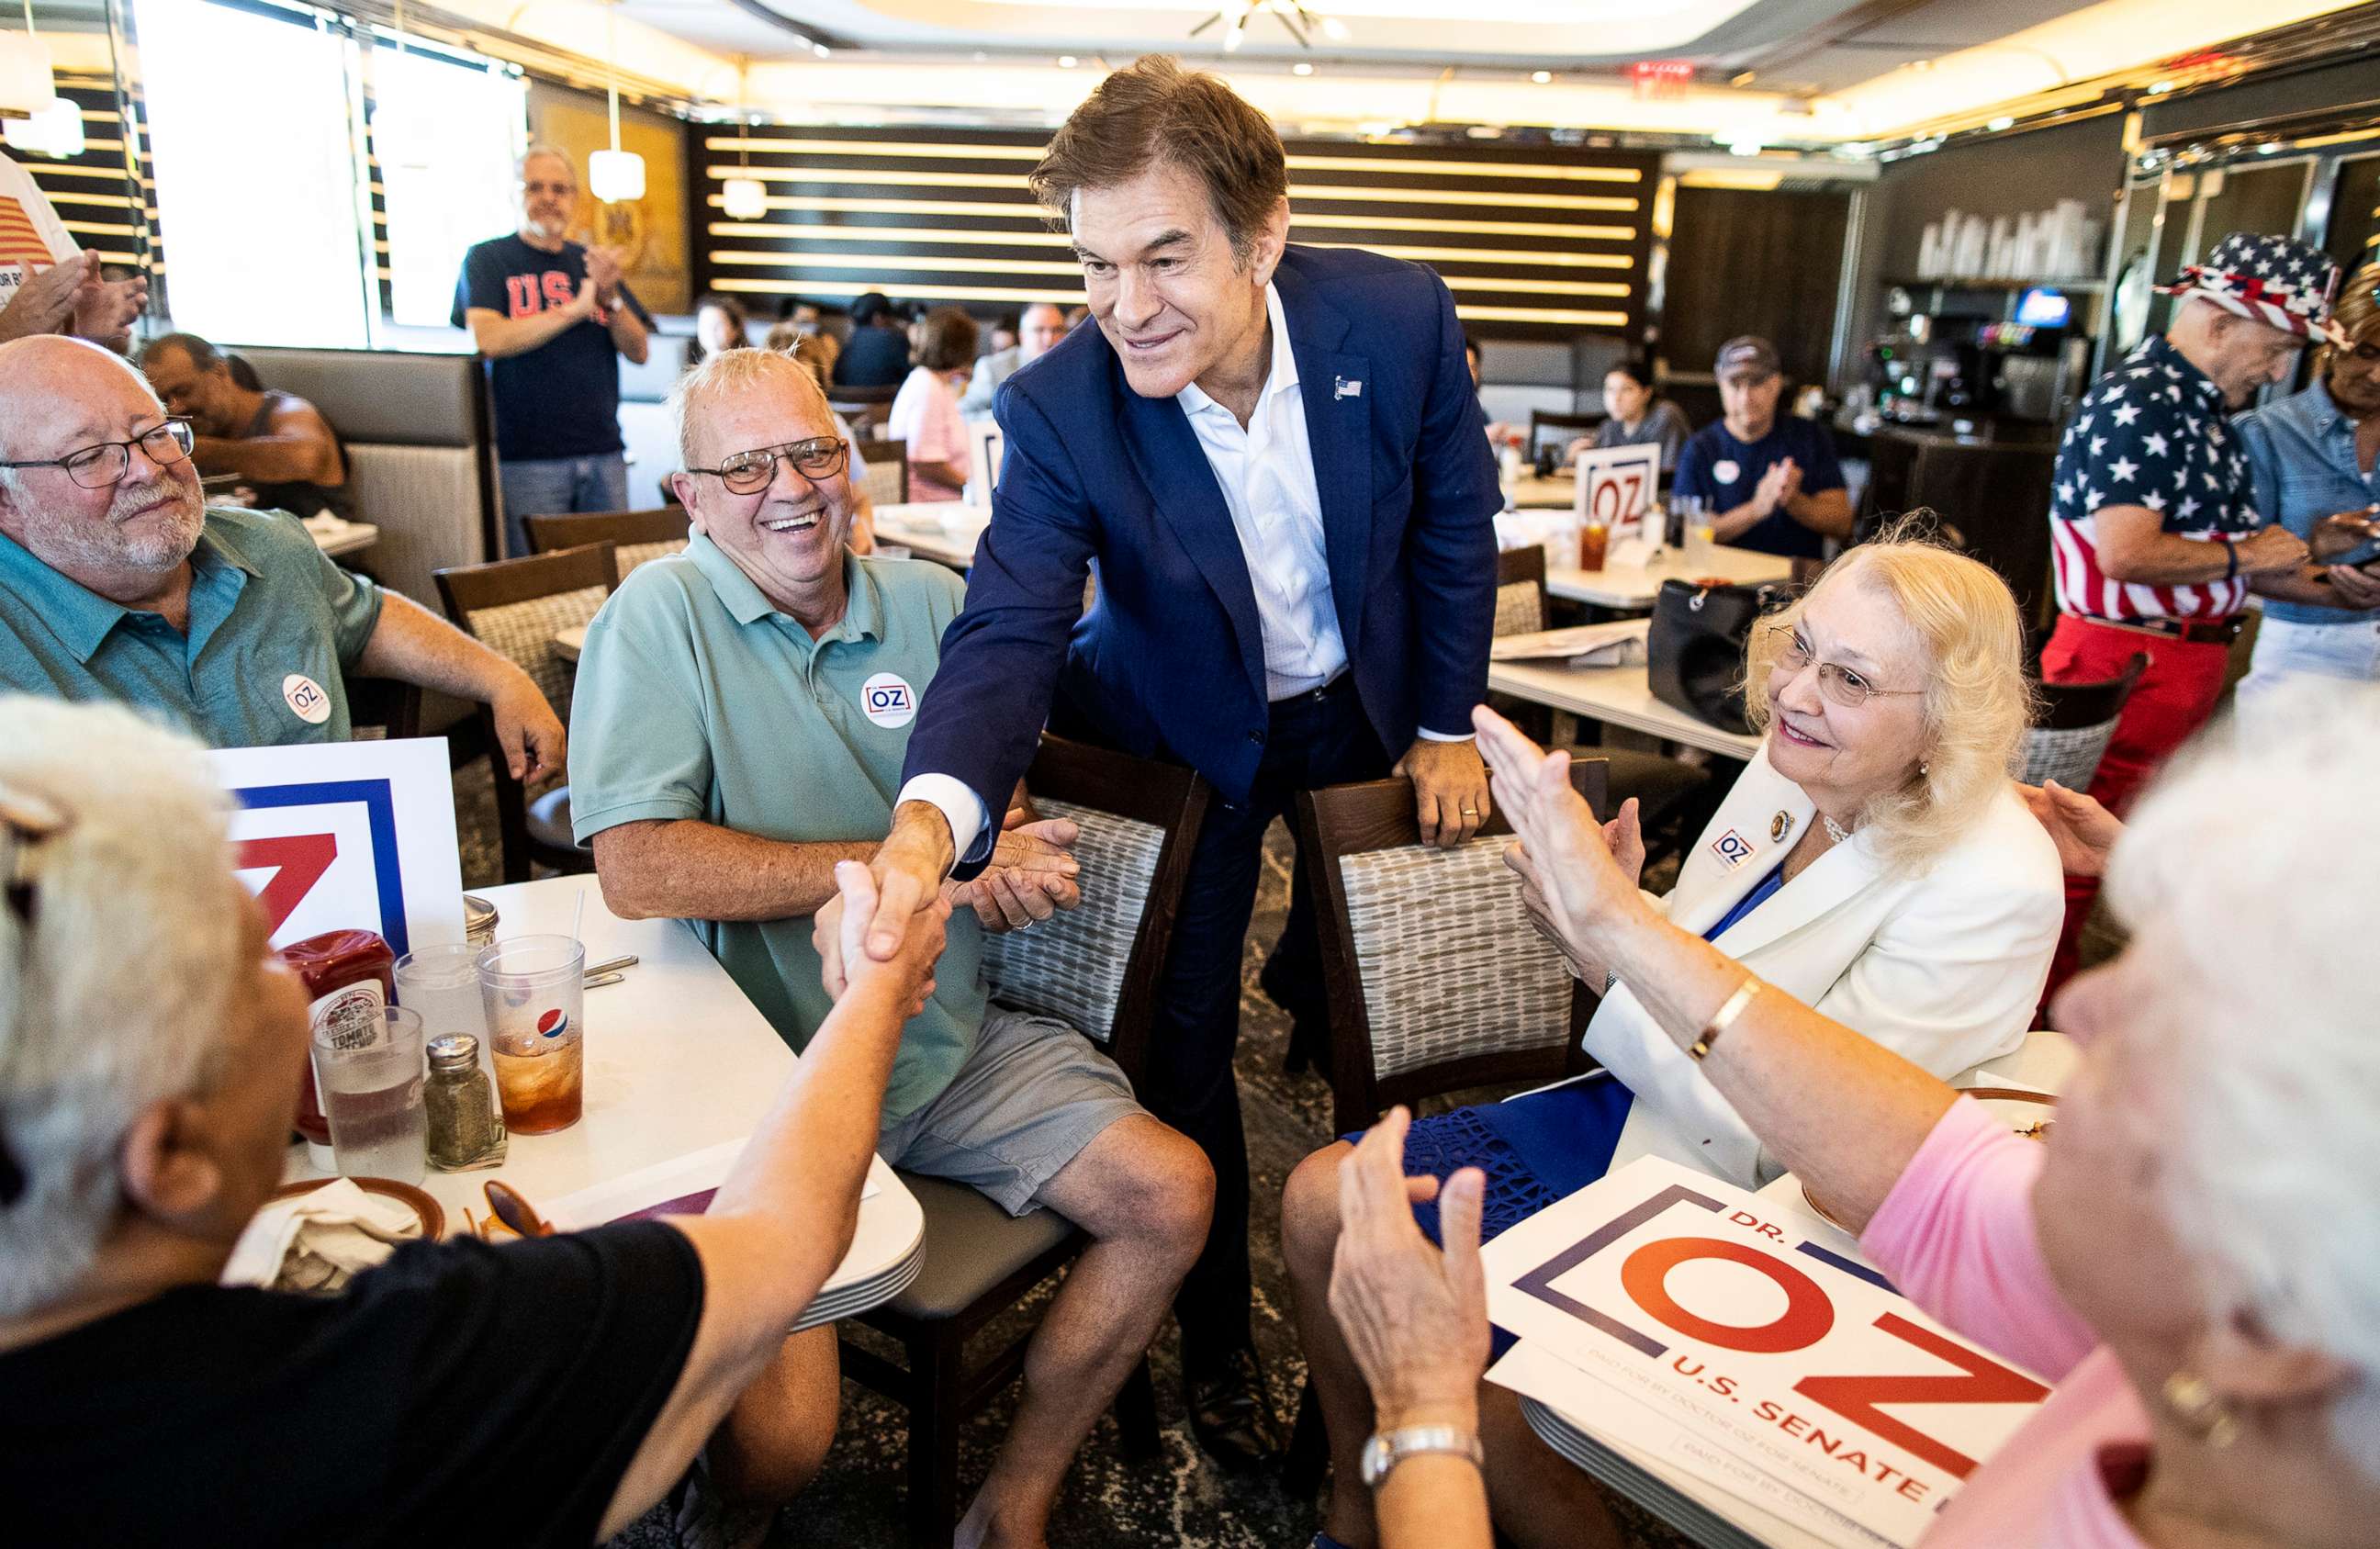 PHOTO: Republican nominee for U.S. Senate, Dr. Mehmet Oz, shakes hands with supporters at The Capitol Diner, on Aug. 12, 2022, in Swatara Township, Pa.